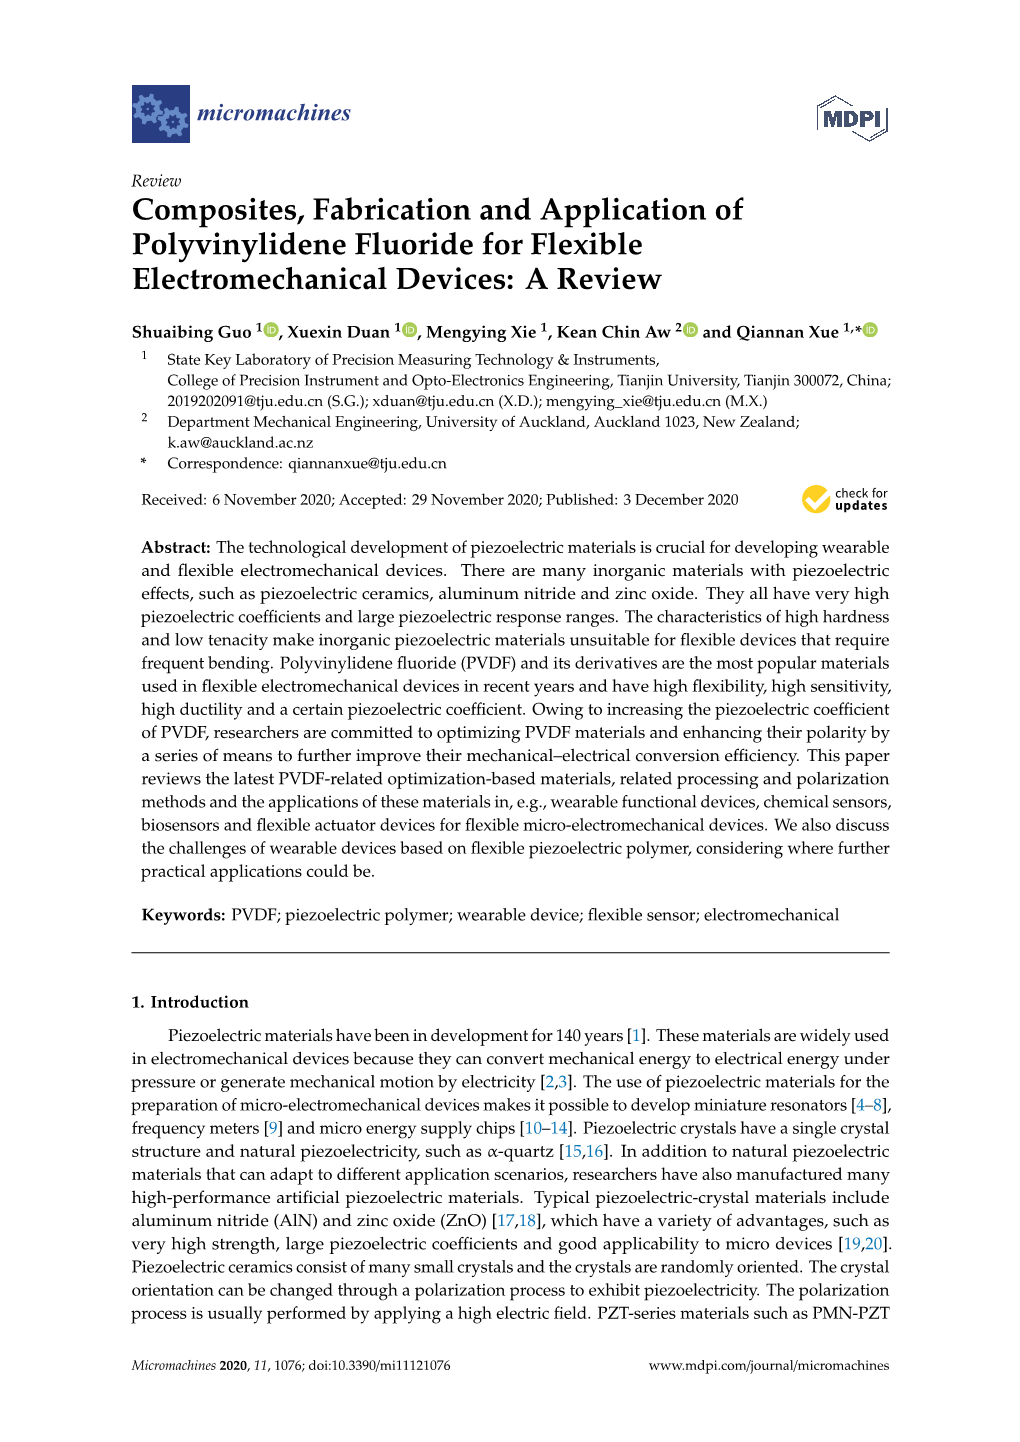 Composites, Fabrication and Application of Polyvinylidene Fluoride for Flexible Electromechanical Devices: a Review